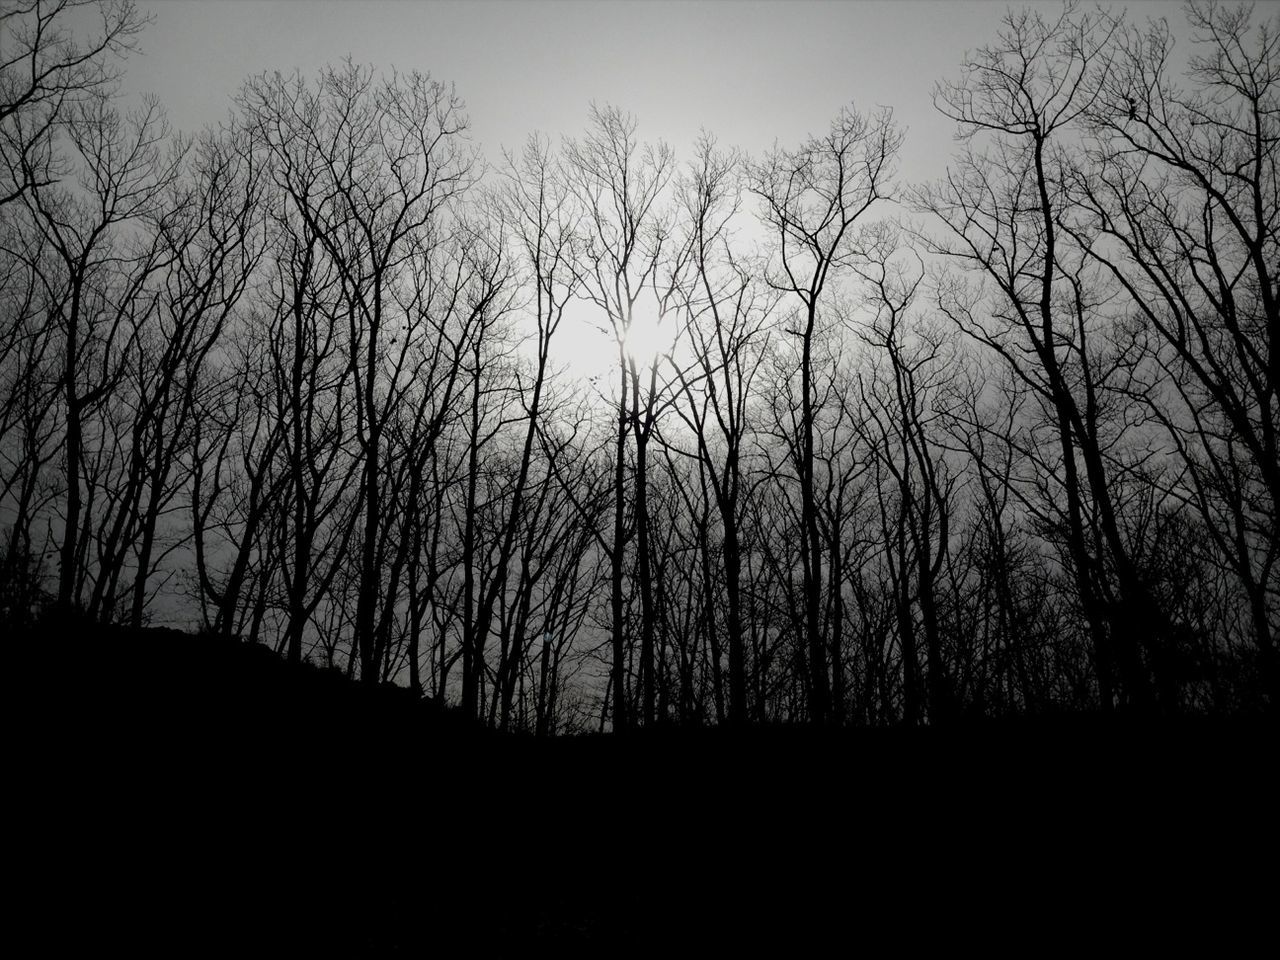 SILHOUETTE OF BARE TREES AGAINST SKY